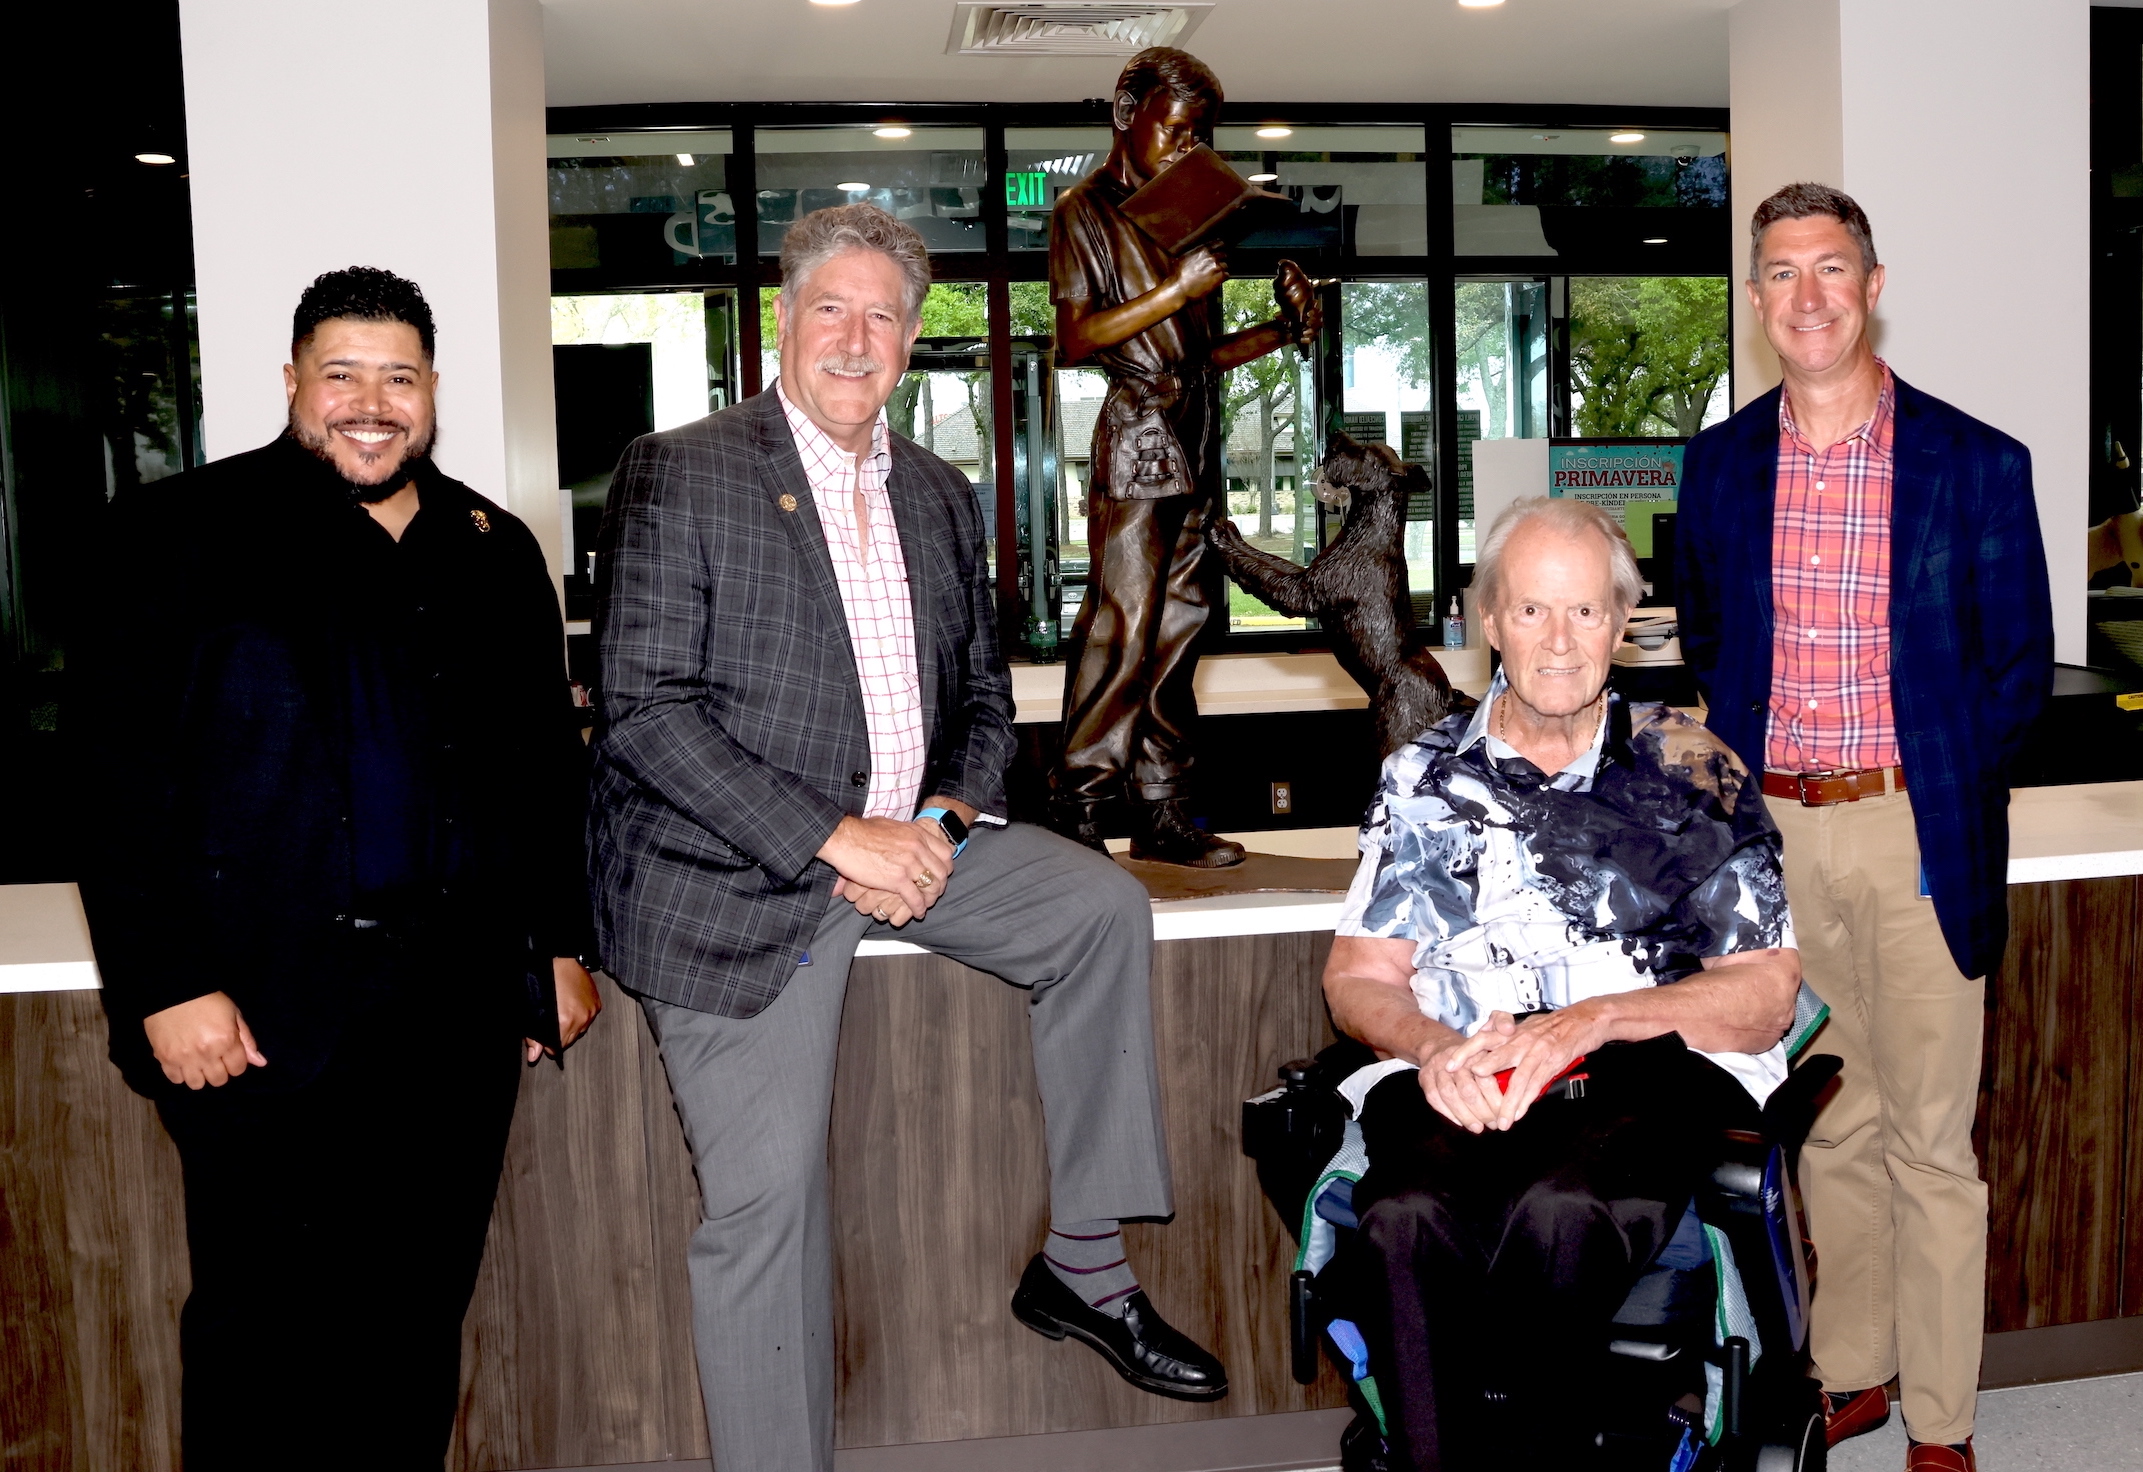 ray lavan, dr obrien, jay eshbach, and matt bolinger pose with sculpture